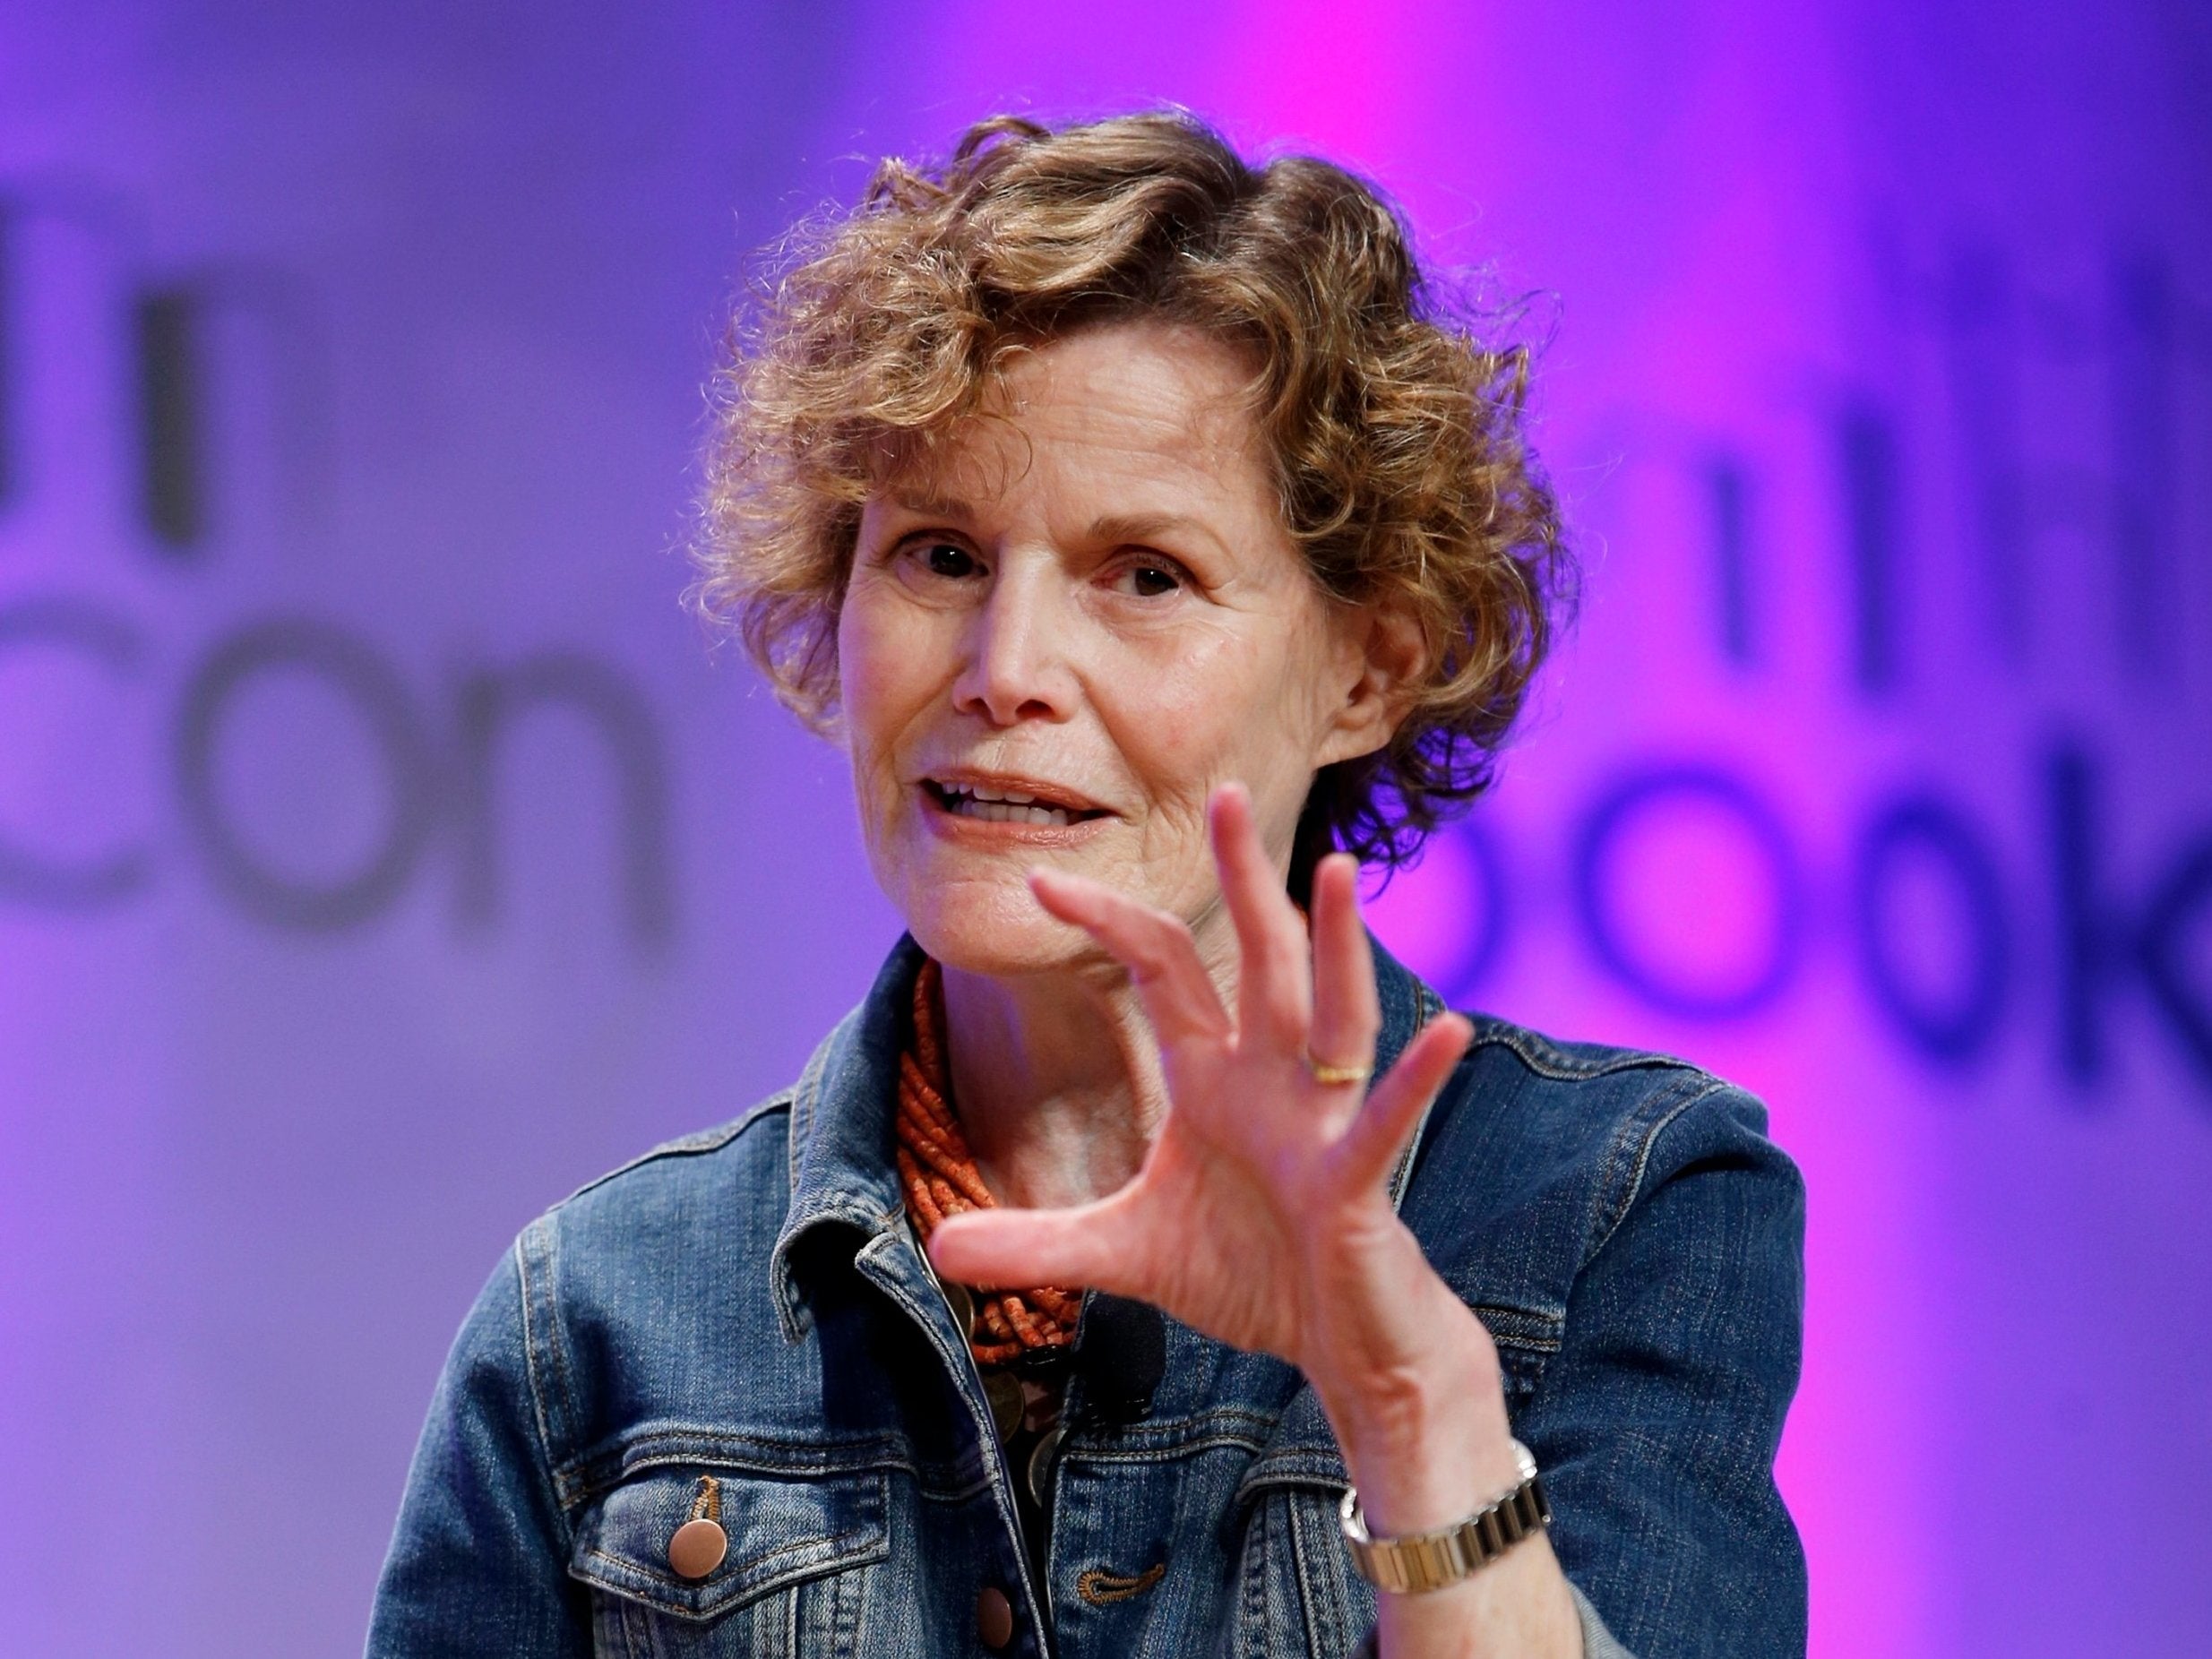 'Are You There God? It's Me, Margaret' author Judy Blume